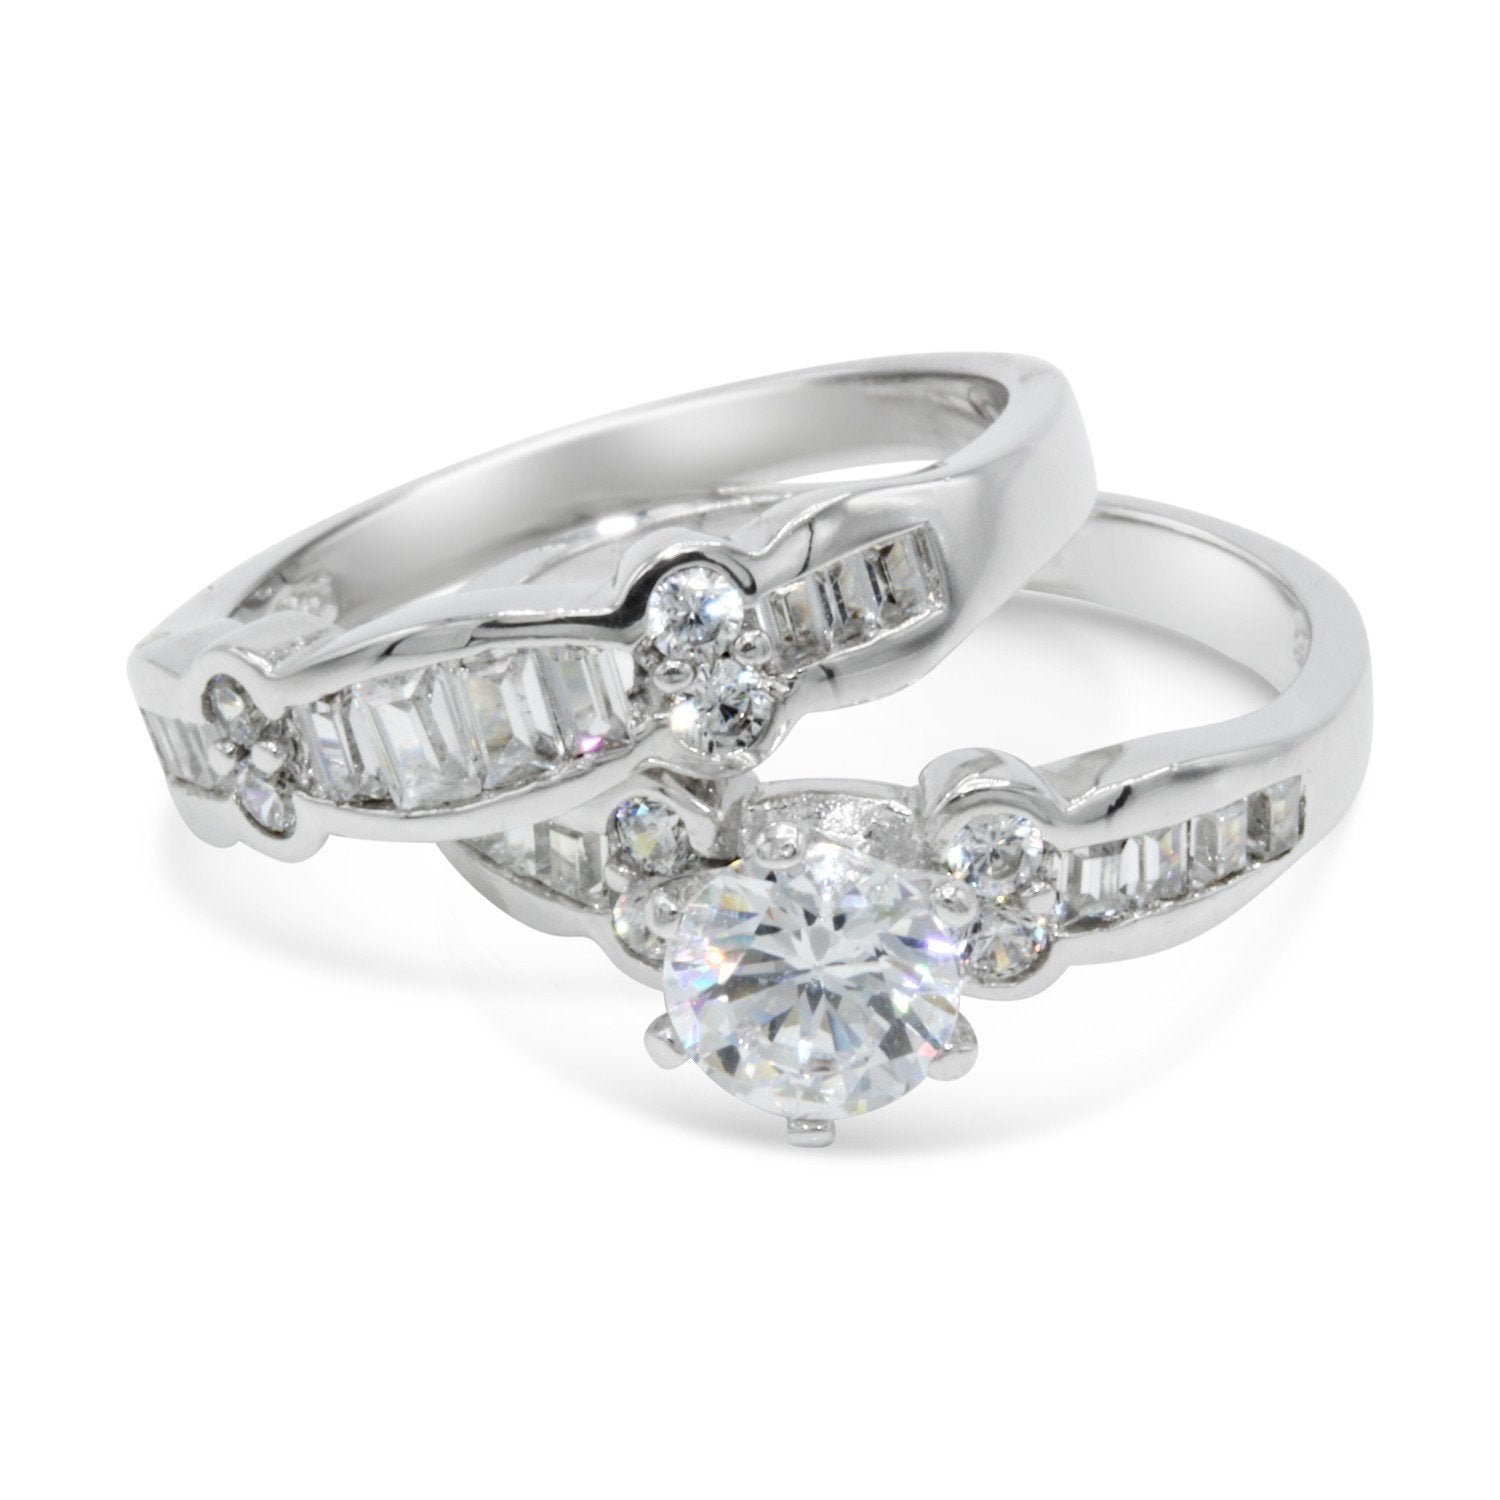 CZ 5mm Center Stone Sterling Silver Plated Crossover Halo Wedding Bridal Set, Engagement Ring